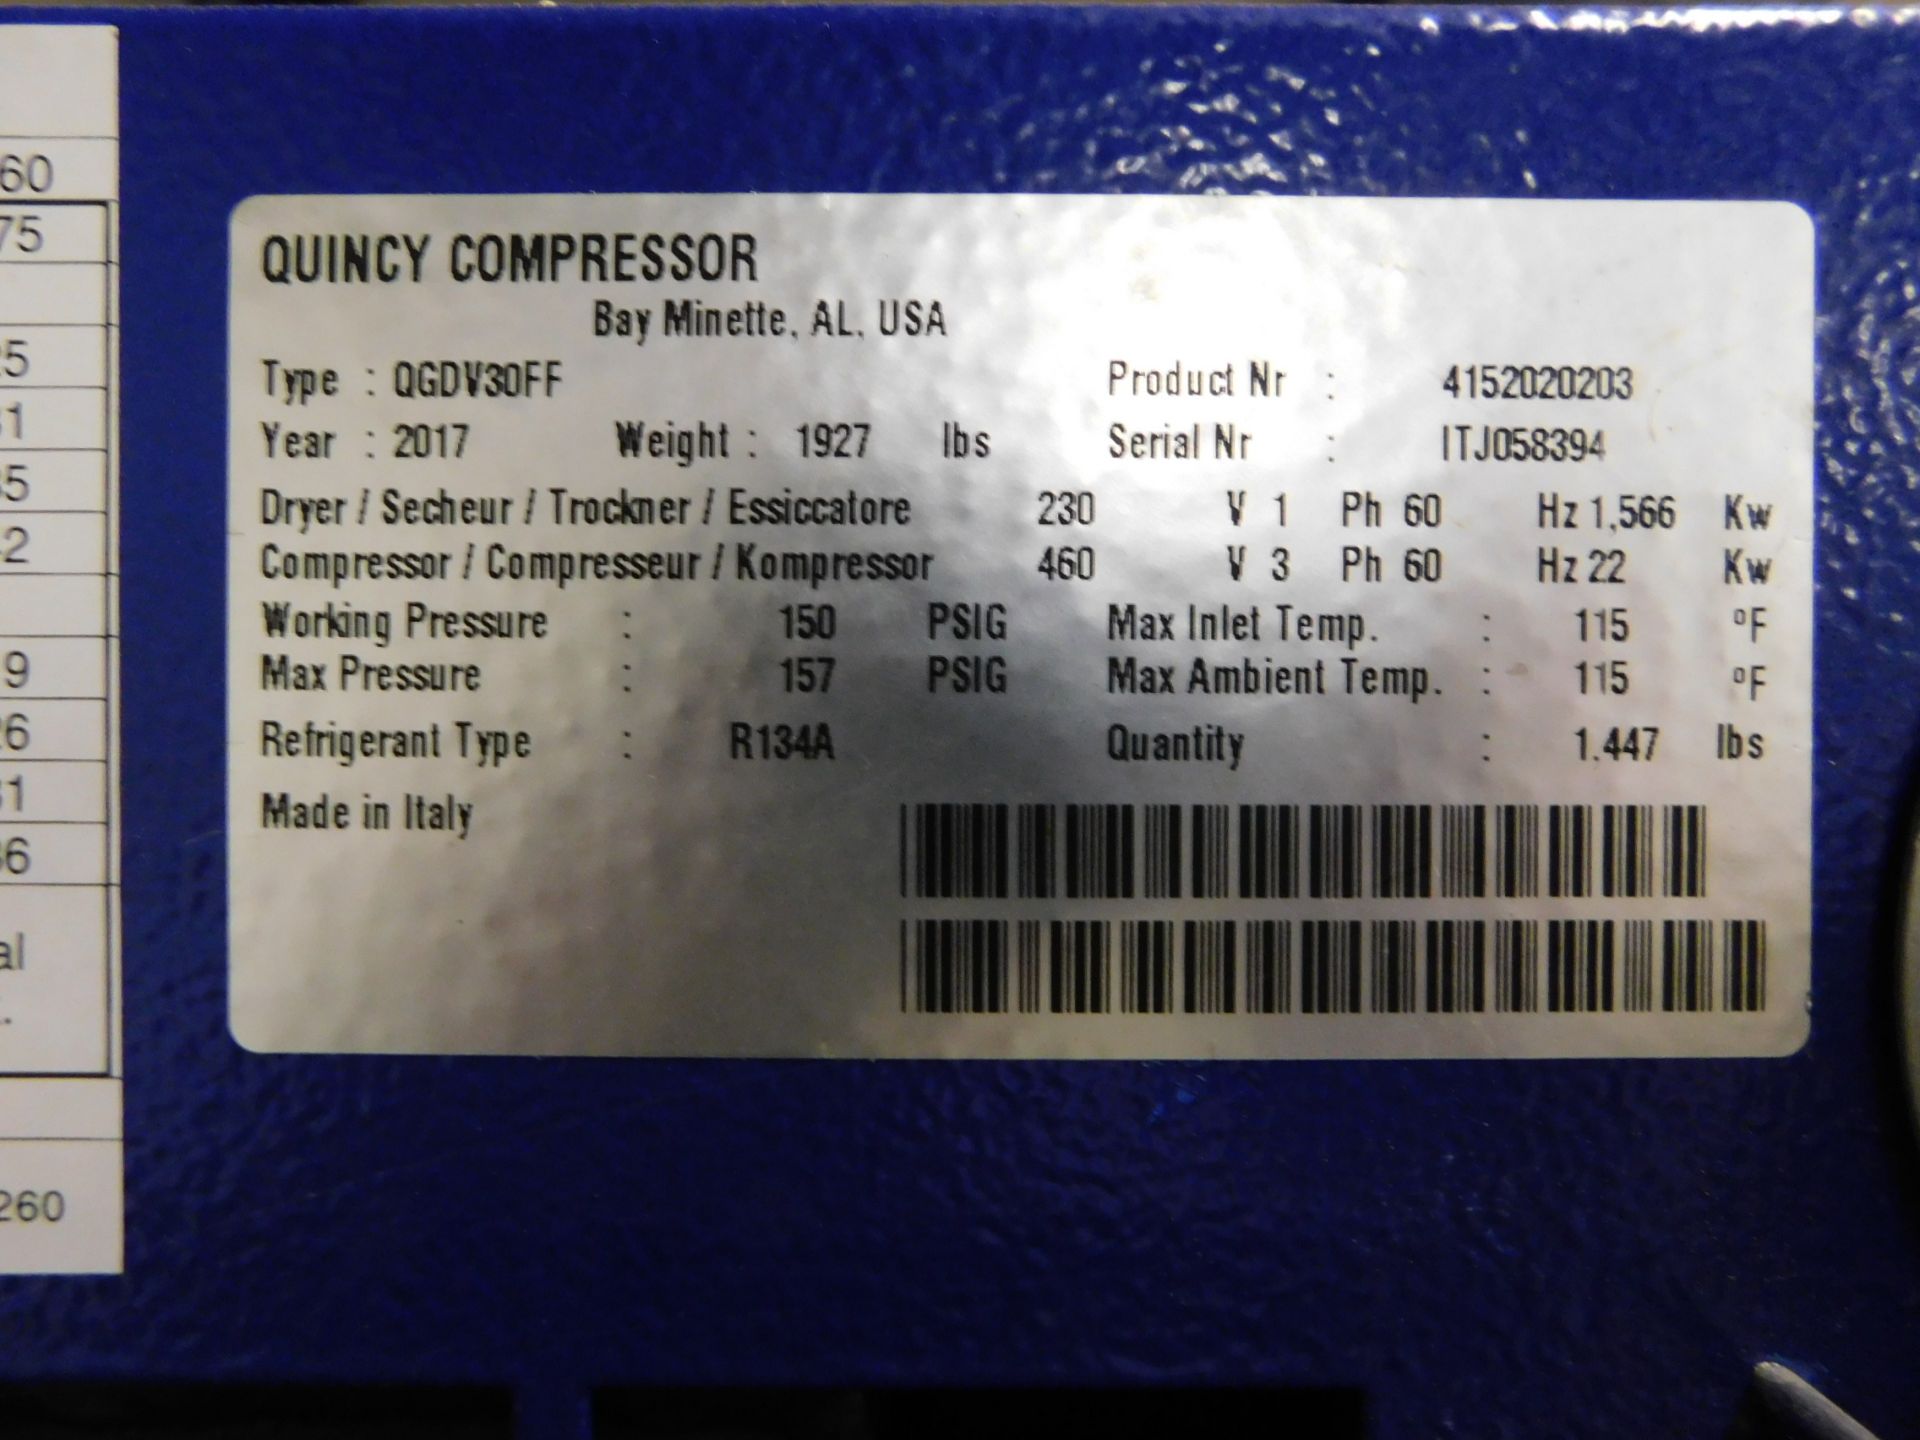 Quincy Model QGDV-30FF Tank-Mounted Rotary Screw Air Compressor, SN ITJ058394,30 HP, Built-in Air - Image 6 of 11